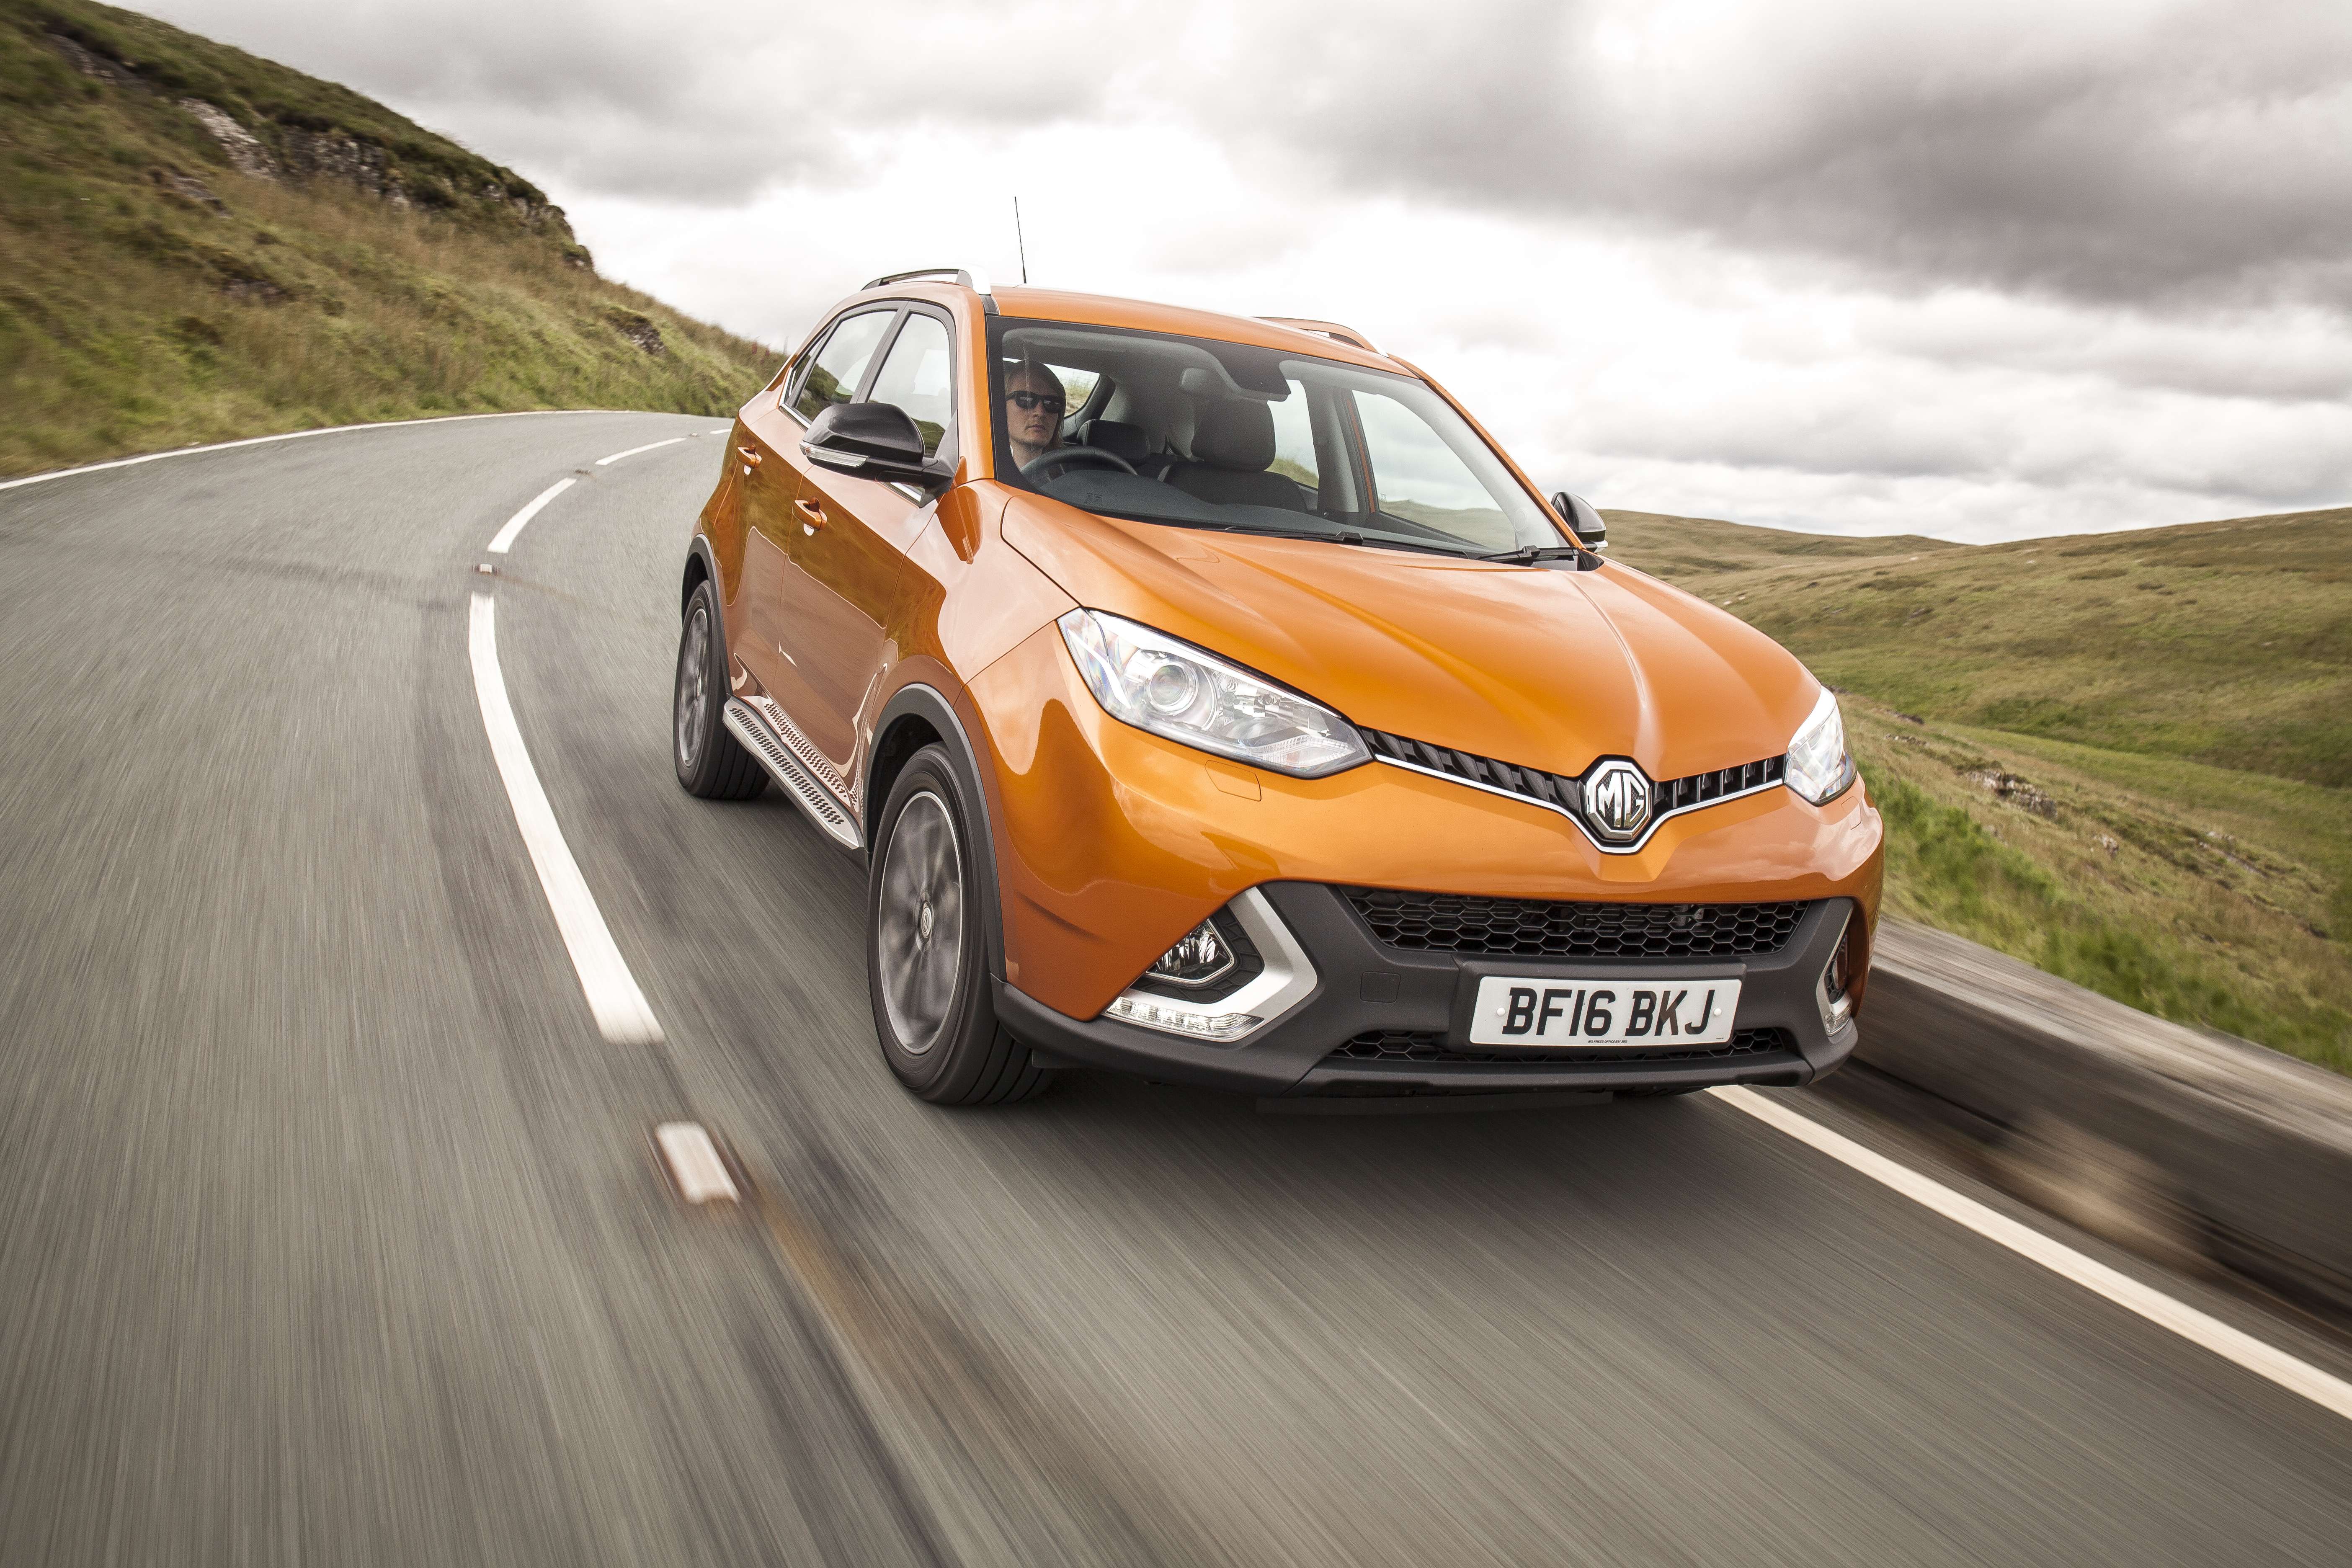 The MG GS gives brisk performance once the turbo kicks in. Photos: MG Motor